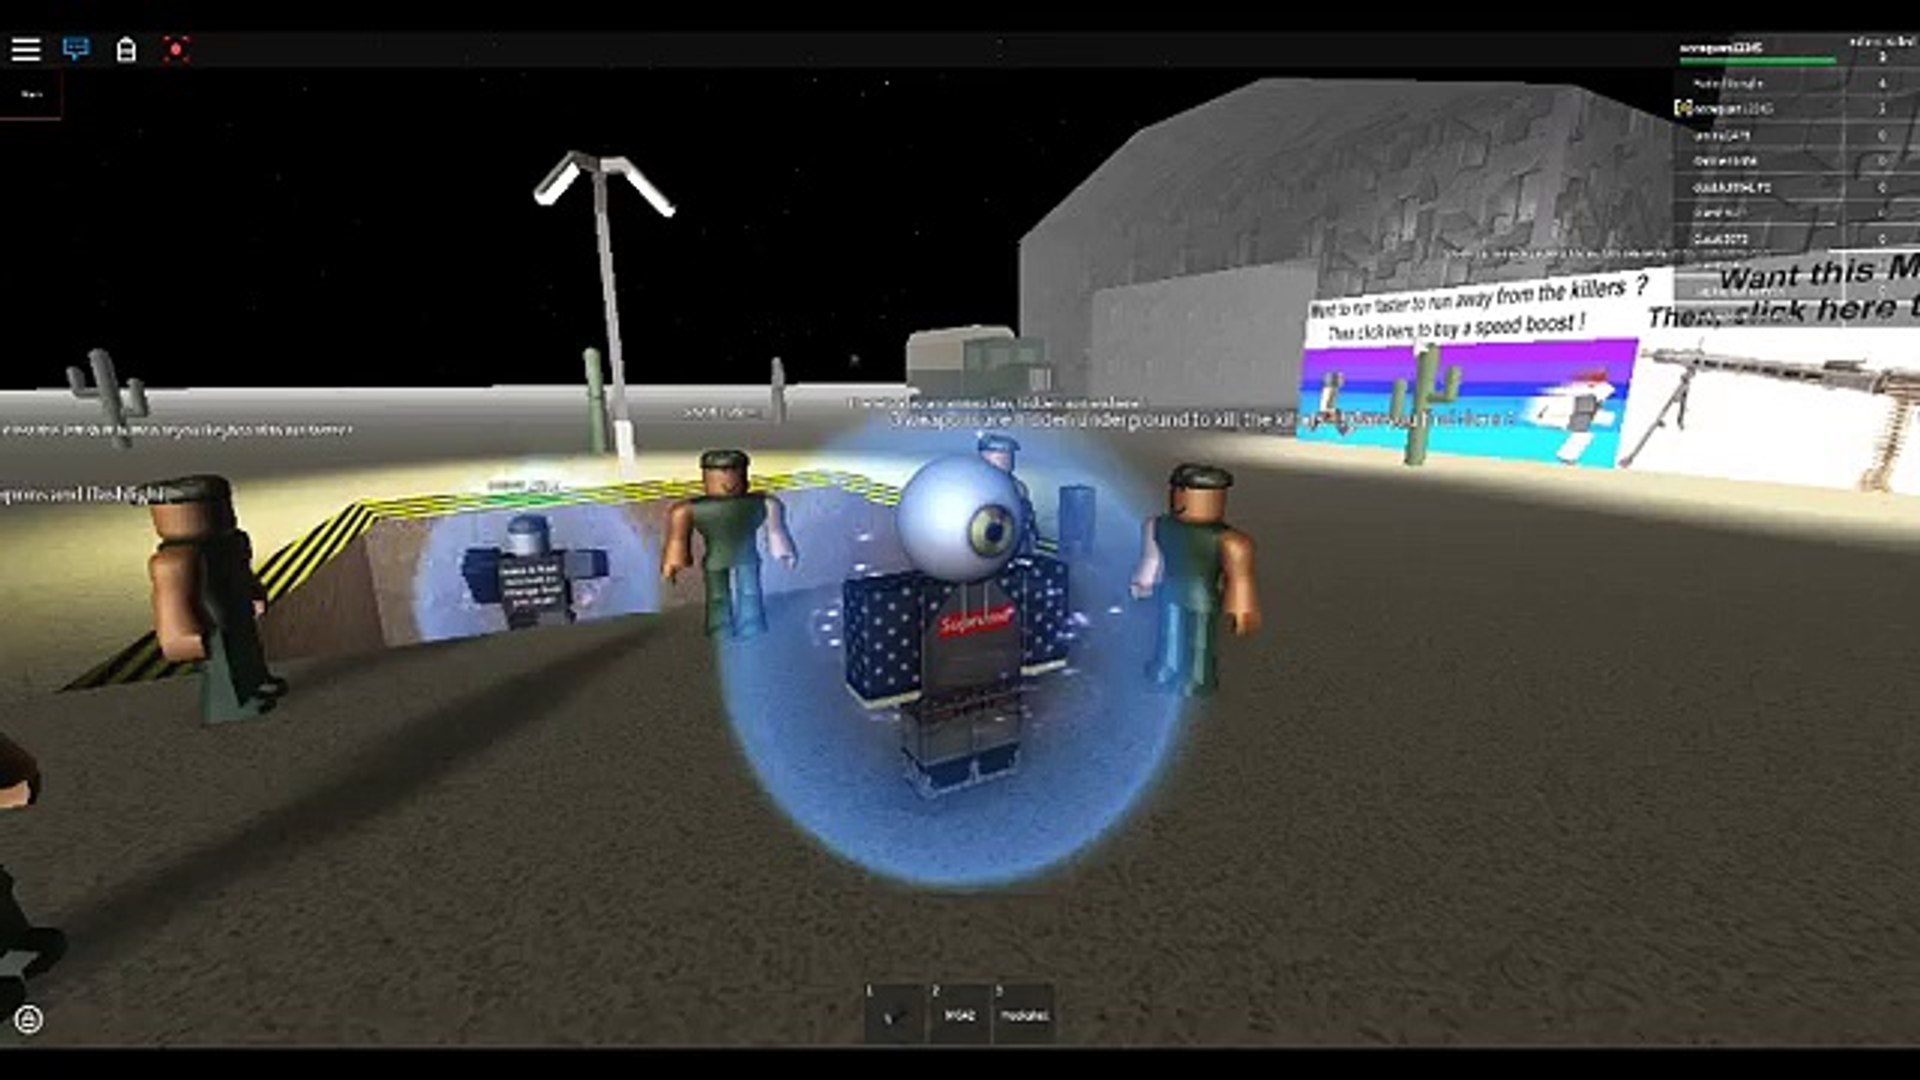 Purple Killer In Roblox Area 51 Chat In Roblox With Only Friends - area51 tycoon roblox